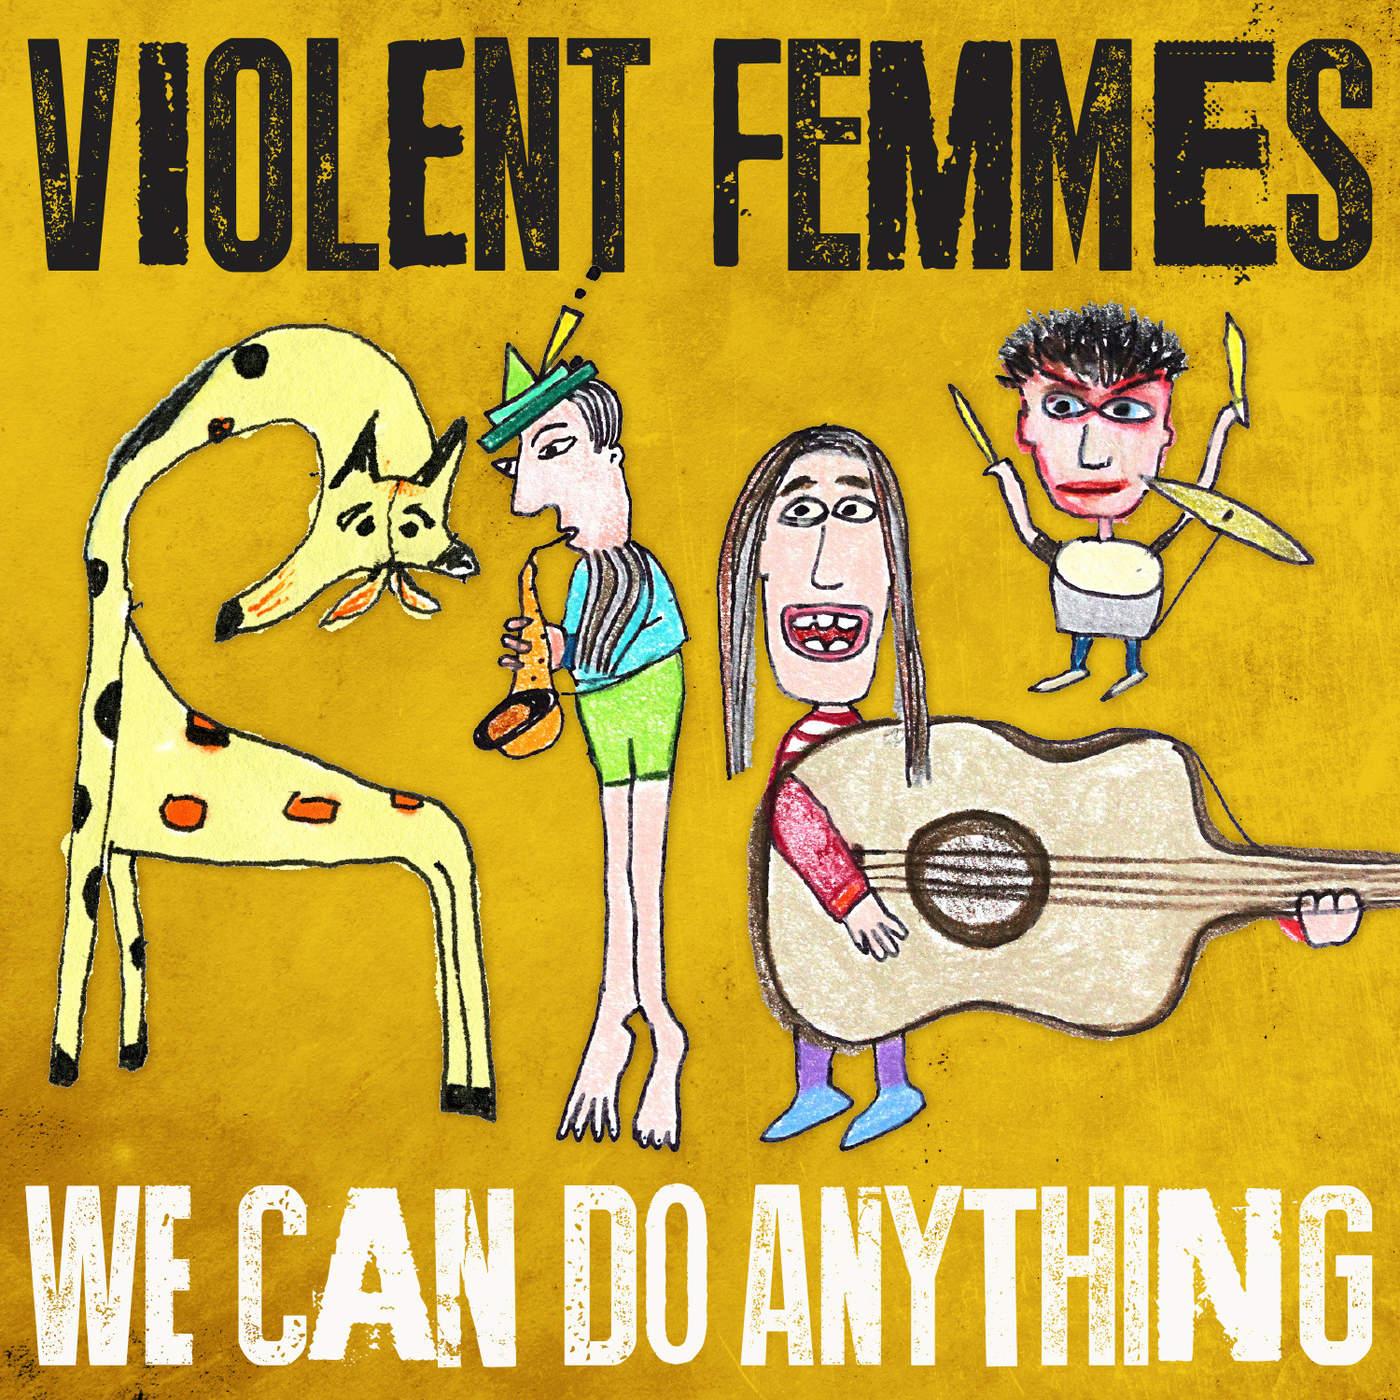 Album Review: “We Can Do Anything” by Violent Femmes